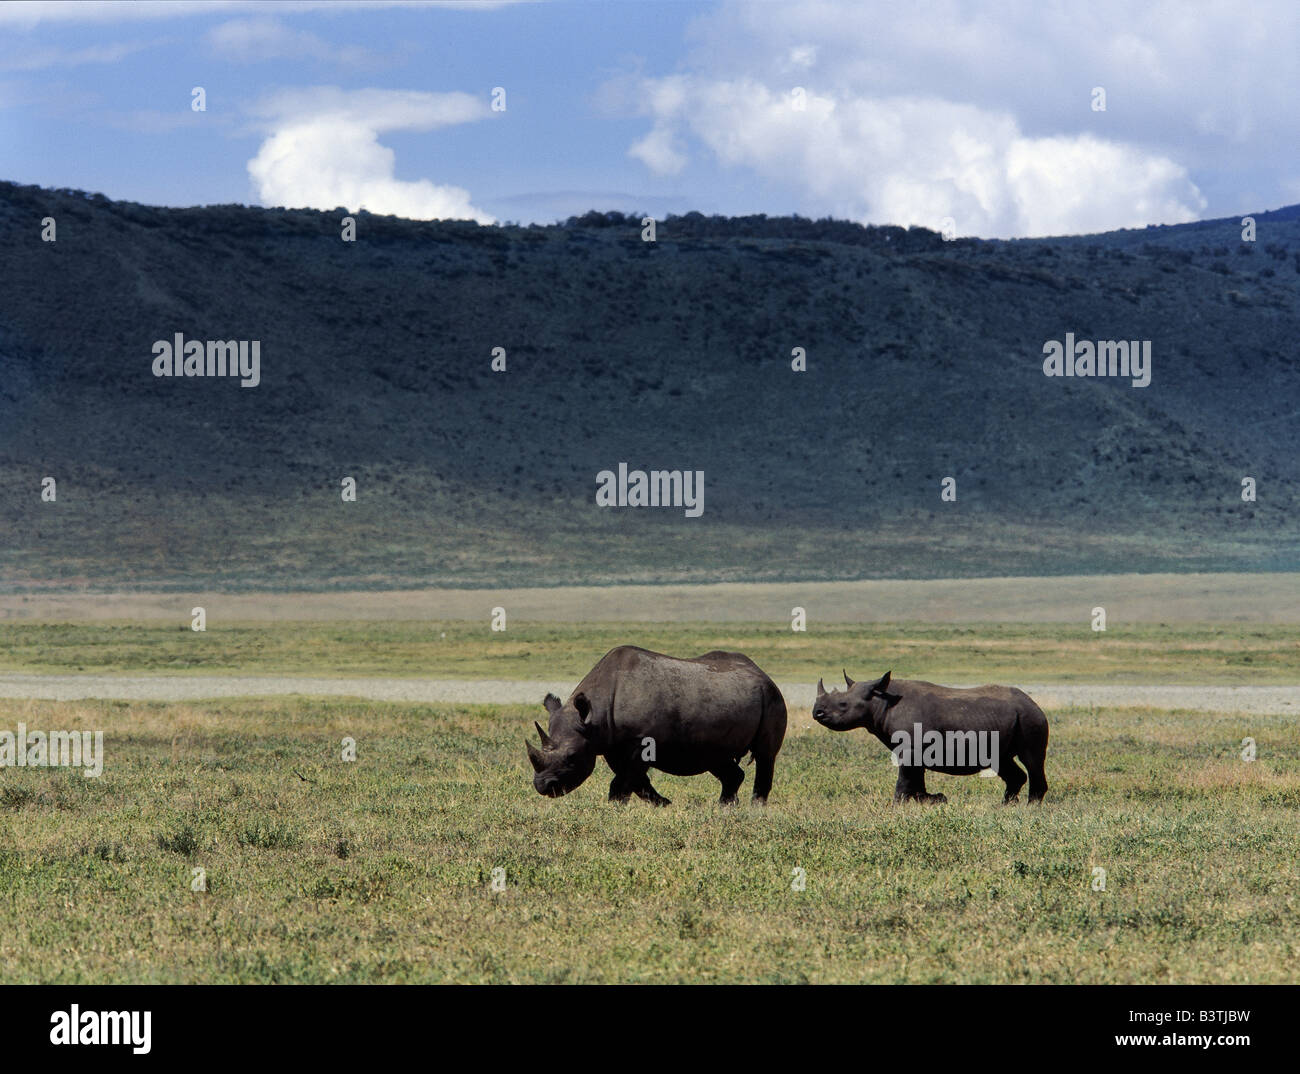 Tanzania, Northern Tanzania, A black rhino mother and offspring are dwarfed by their surroundings in the world famous Ngorongoro Crater. The crater's 102-square-mile floor is spectacular for wildlife. This feature is in fact a 'caldera' - the largest unbroken, unflooded caldera in the world - which was formed two and a half million years ago when a huge explosion destroyed the walls of a volcano standing about 15,000 feet high. Ngorongoro was declared a World Heritage Site in 1978. Stock Photo